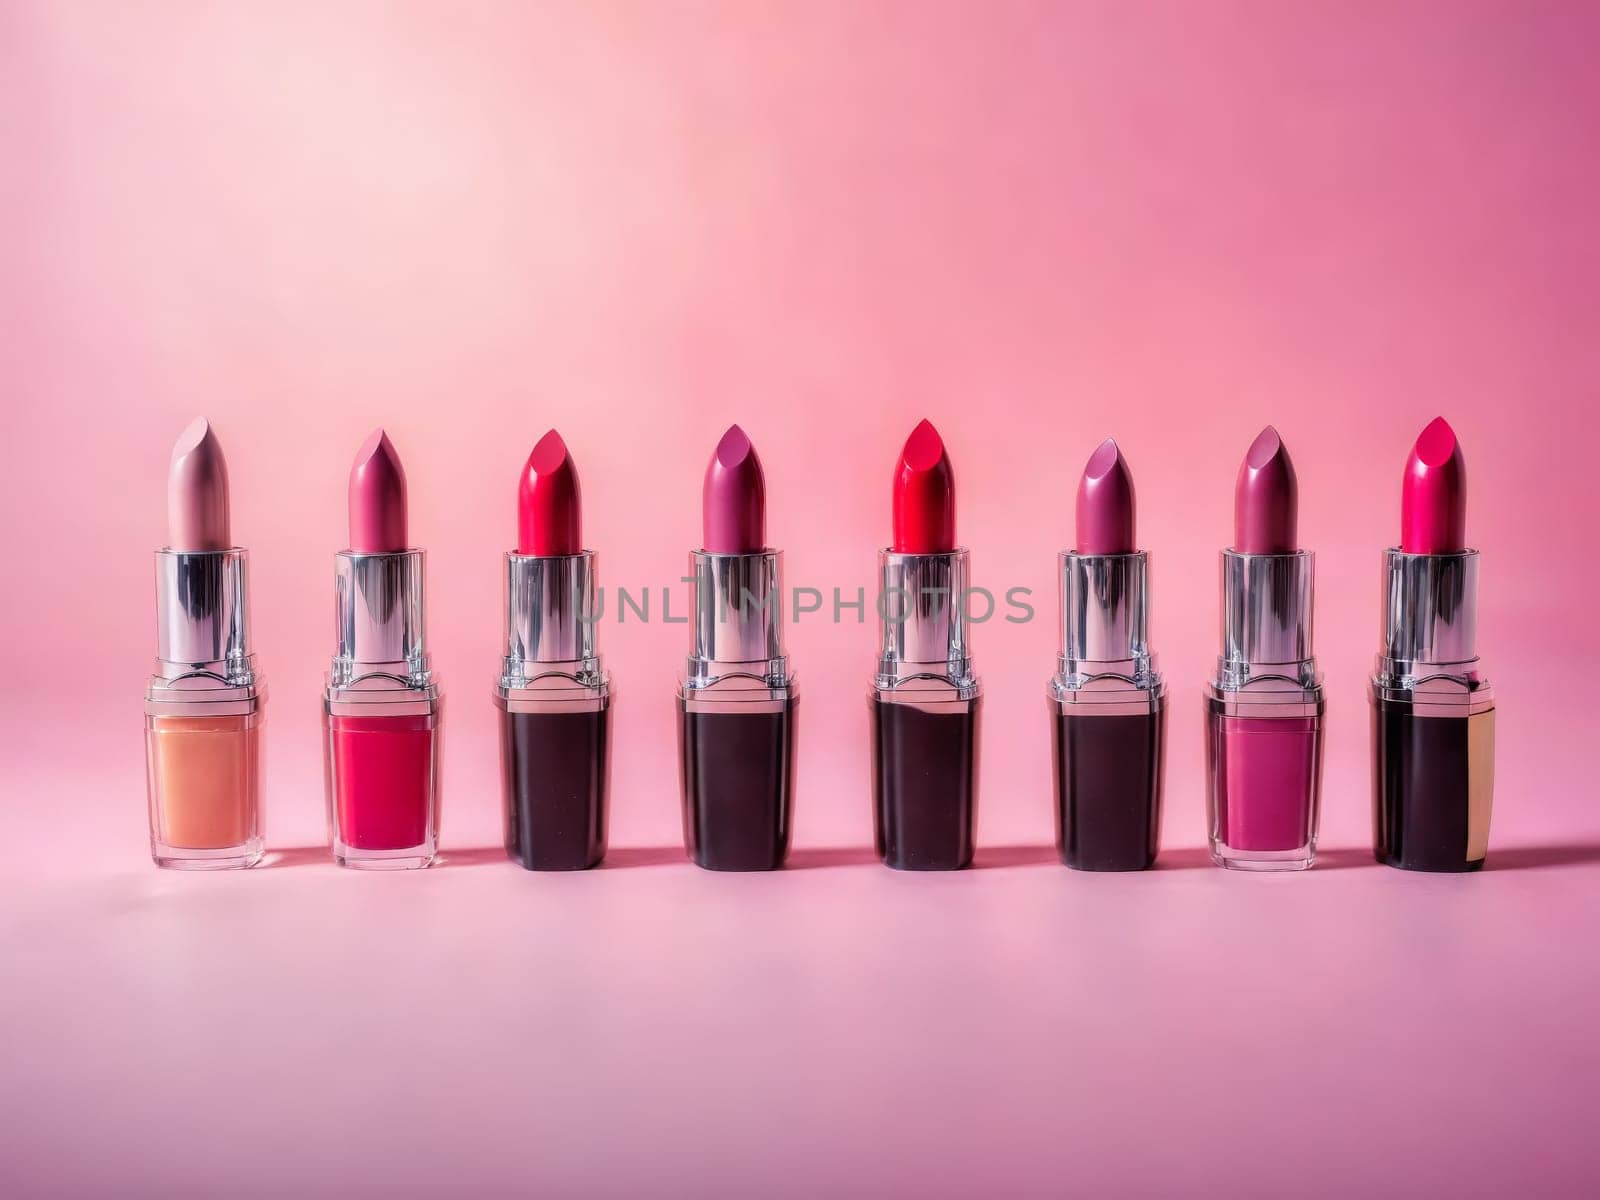 Colorful beauty product flatlay lipsticks compacts brushes scattered on pastel background bright top down lighting by panophotograph